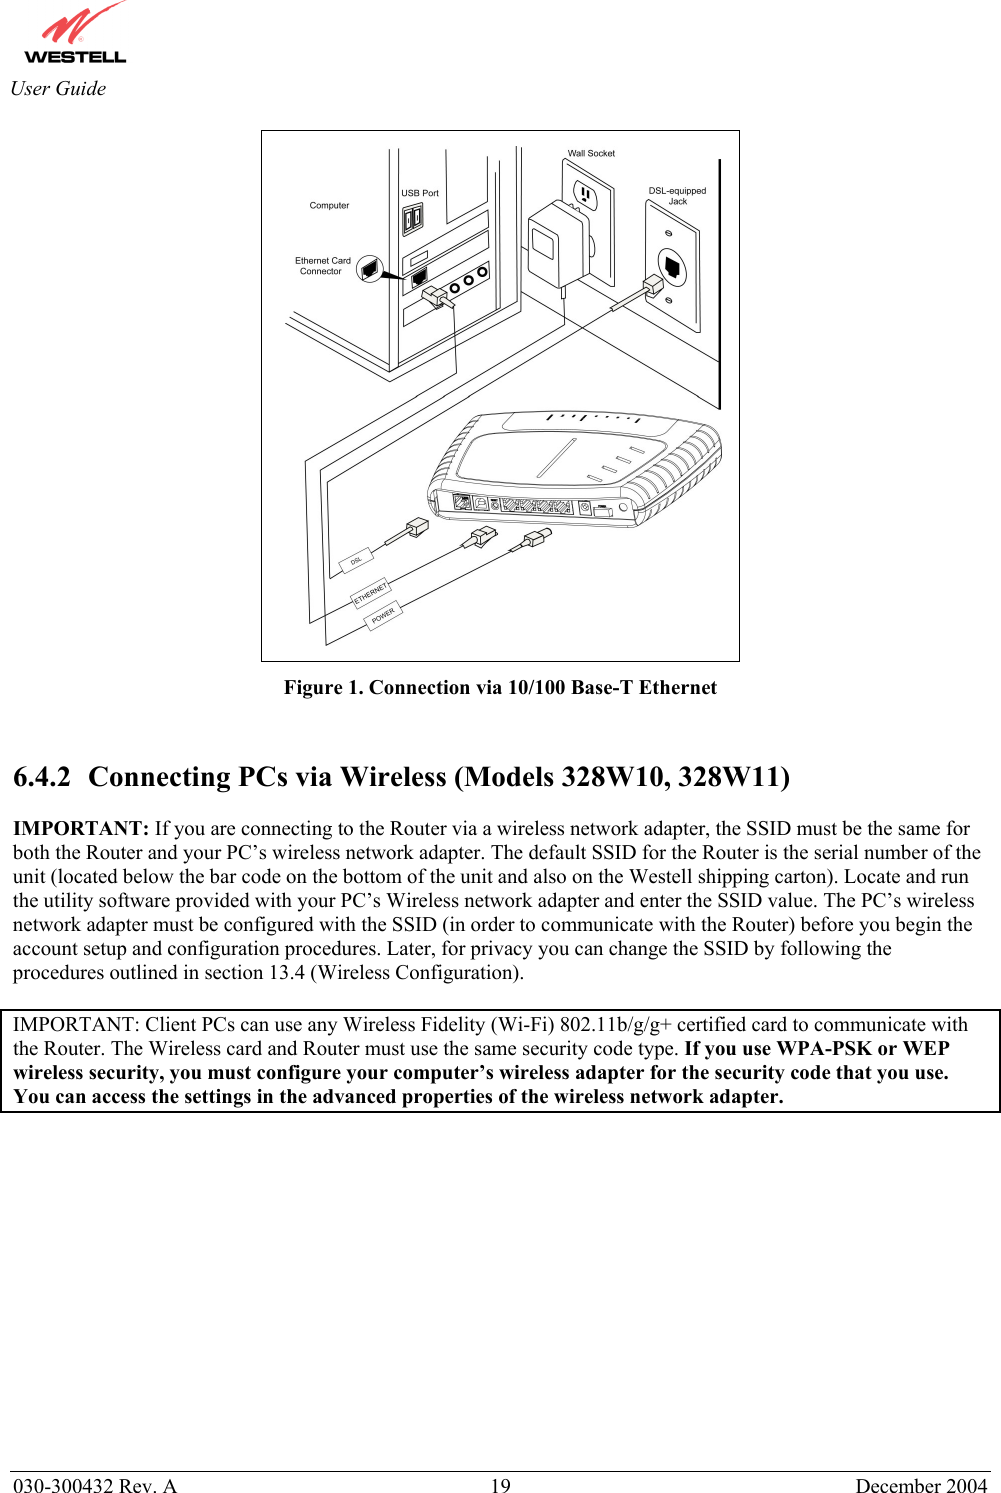       030-300432 Rev. A  19 December 2004  User Guide  Figure 1. Connection via 10/100 Base-T Ethernet   6.4.2  Connecting PCs via Wireless (Models 328W10, 328W11)  IMPORTANT: If you are connecting to the Router via a wireless network adapter, the SSID must be the same for both the Router and your PC’s wireless network adapter. The default SSID for the Router is the serial number of the unit (located below the bar code on the bottom of the unit and also on the Westell shipping carton). Locate and run the utility software provided with your PC’s Wireless network adapter and enter the SSID value. The PC’s wireless network adapter must be configured with the SSID (in order to communicate with the Router) before you begin the account setup and configuration procedures. Later, for privacy you can change the SSID by following the procedures outlined in section 13.4 (Wireless Configuration).  IMPORTANT: Client PCs can use any Wireless Fidelity (Wi-Fi) 802.11b/g/g+ certified card to communicate with the Router. The Wireless card and Router must use the same security code type. If you use WPA-PSK or WEP wireless security, you must configure your computer’s wireless adapter for the security code that you use. You can access the settings in the advanced properties of the wireless network adapter.             